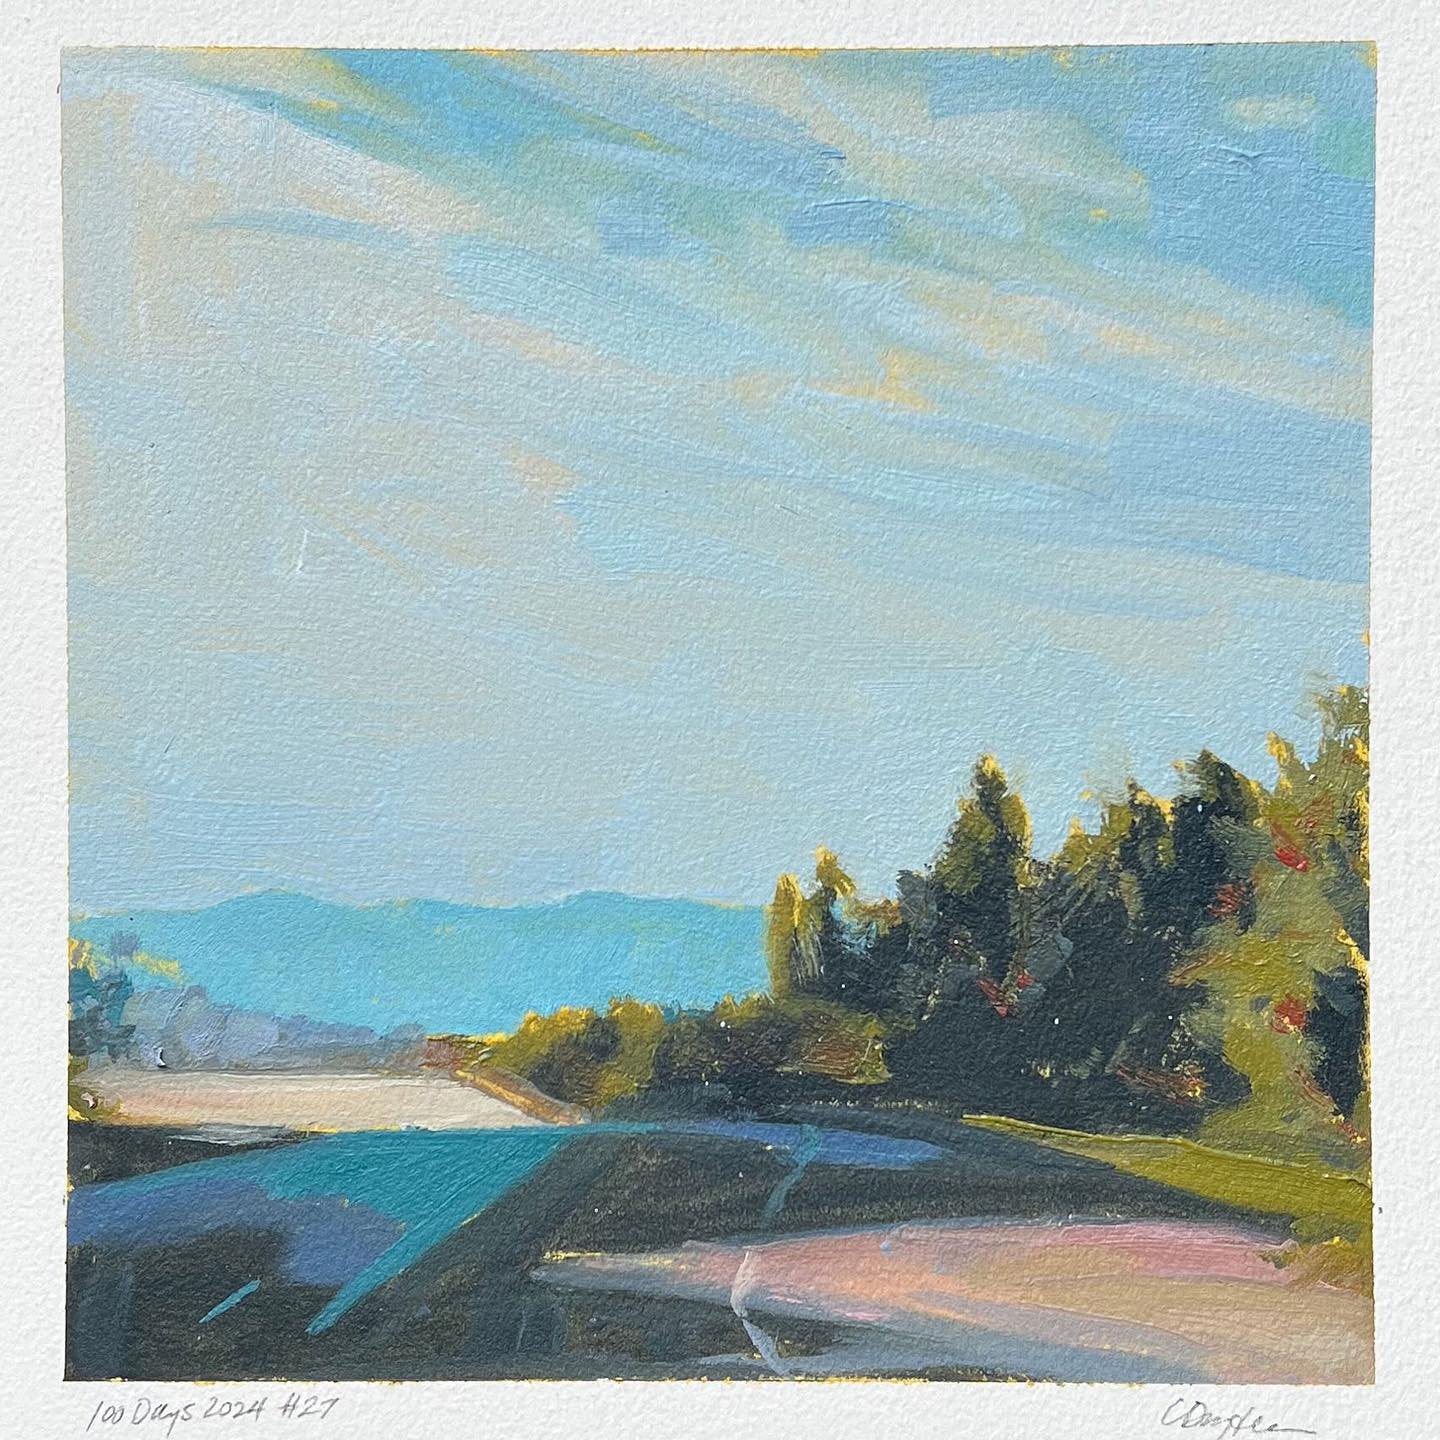 27/100 #100daysoflandscapestudies
8x8, oil on paper
#the100dayproject